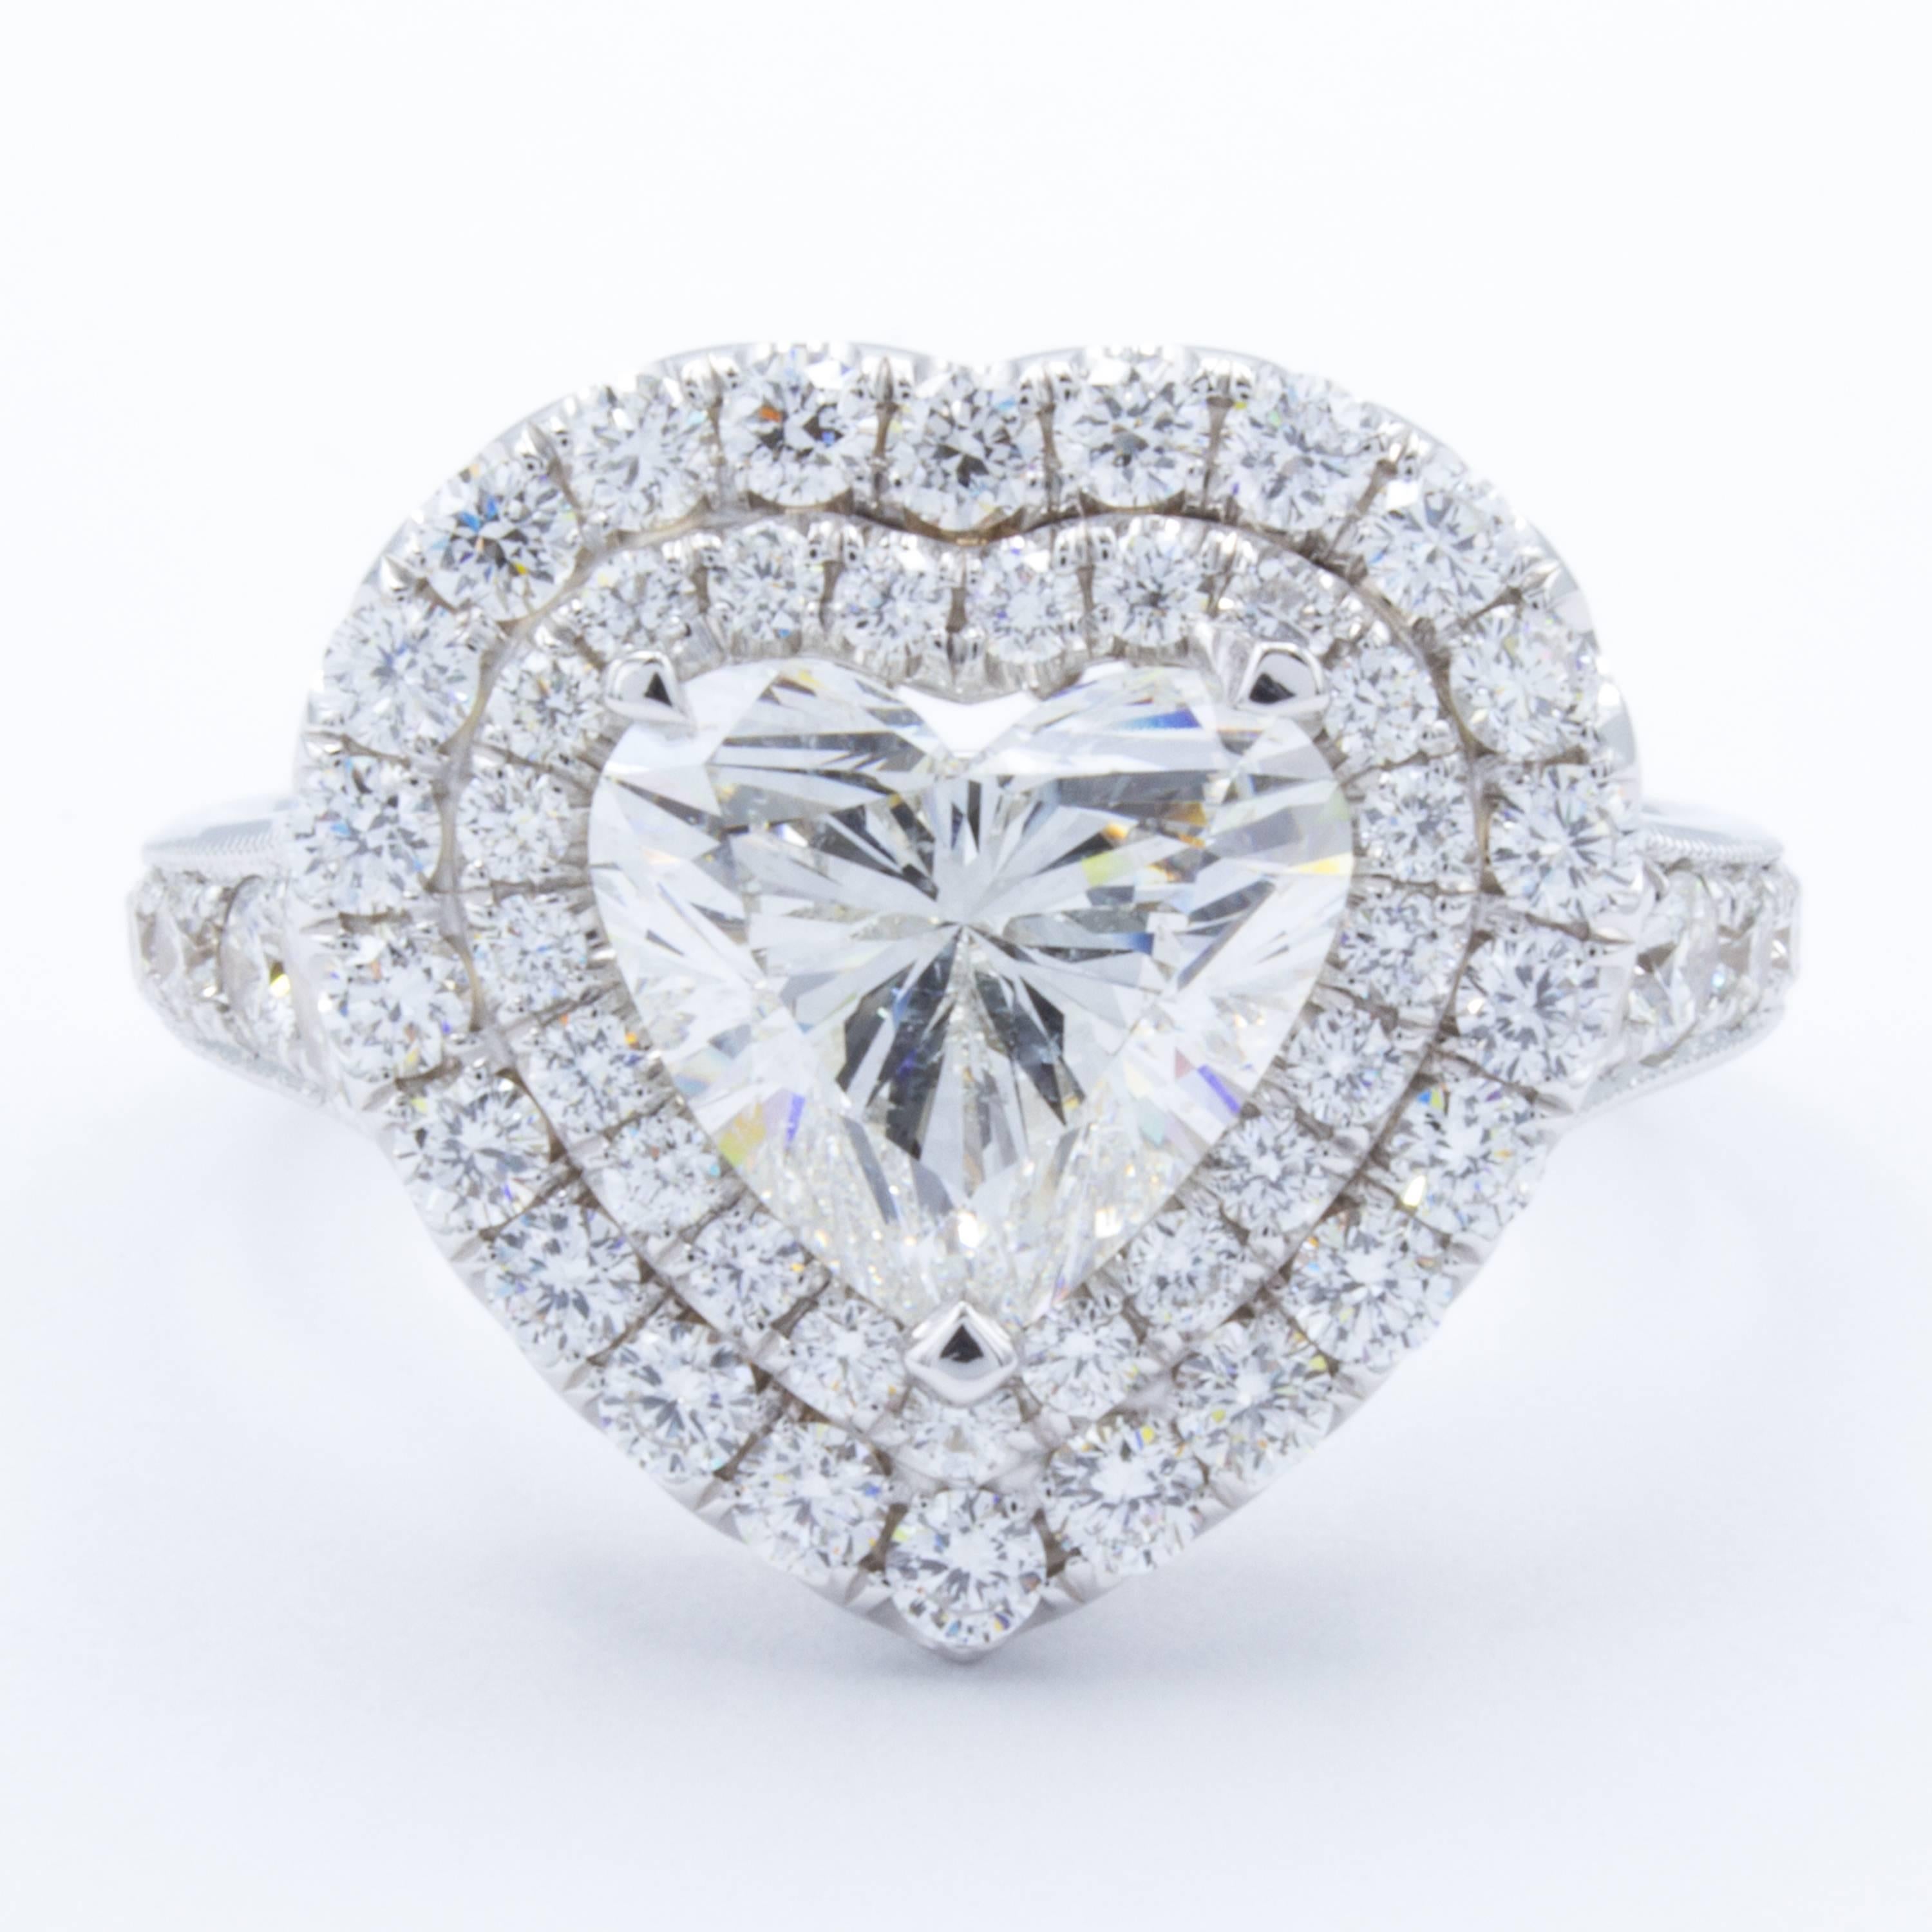 A romantic Rosenberg Diamonds & Co. diamond engagement ring displays a bouquet of shimmering pave set diamonds and a beautiful GIA certified 2.01 carat heart shaped diamond. Embraced in 18Kt white gold, each pave set diamond creates both an elegant